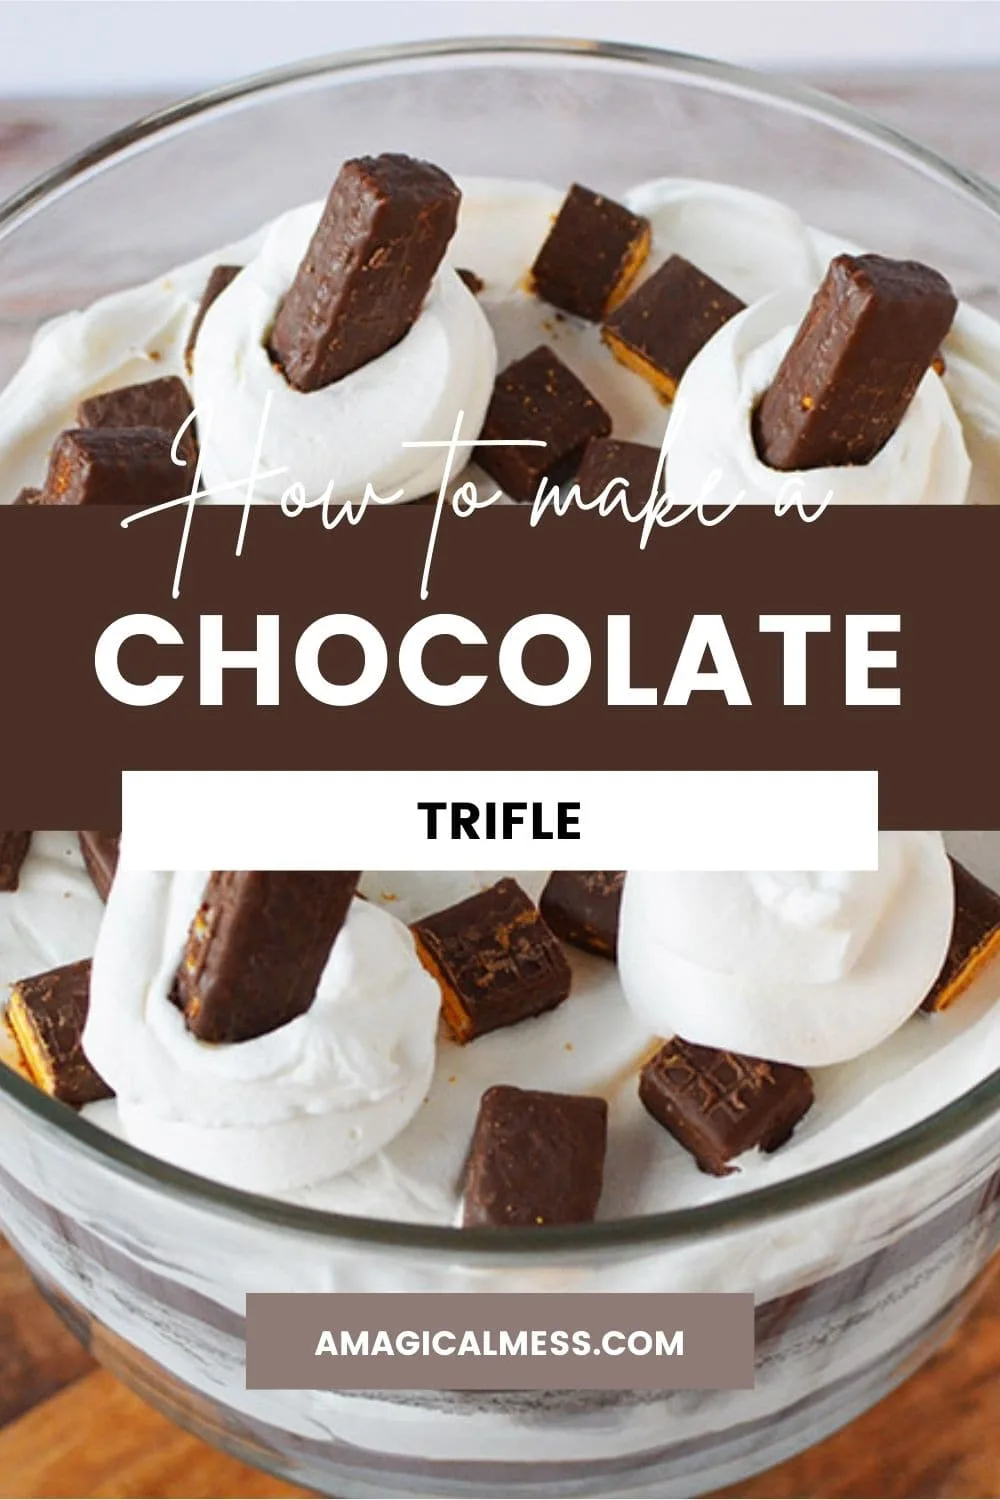 Fudge stick cookies in whipped cream topping a chocolate cake trifle